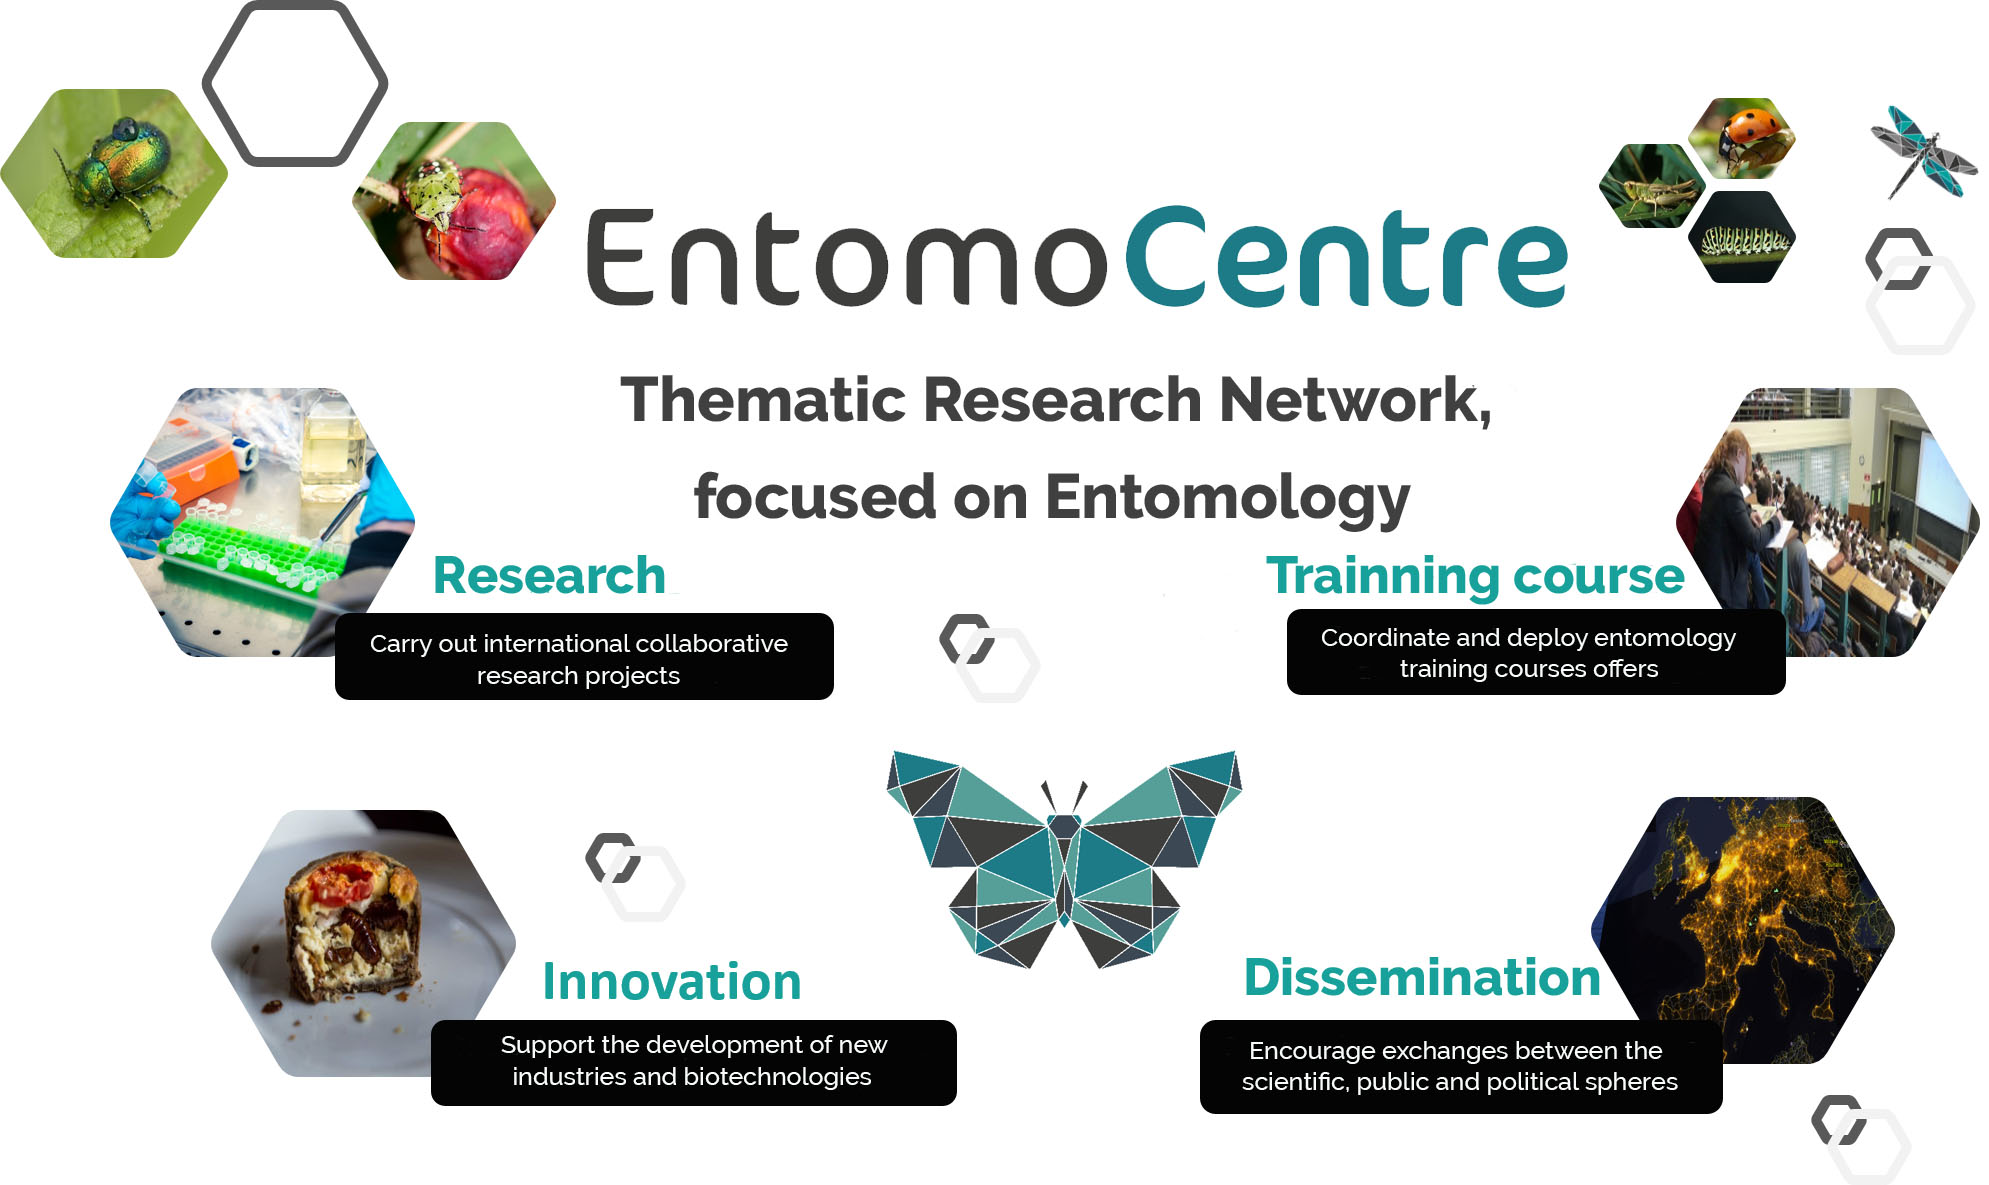 Network actions: Research, Training, Innovation, Dissemination